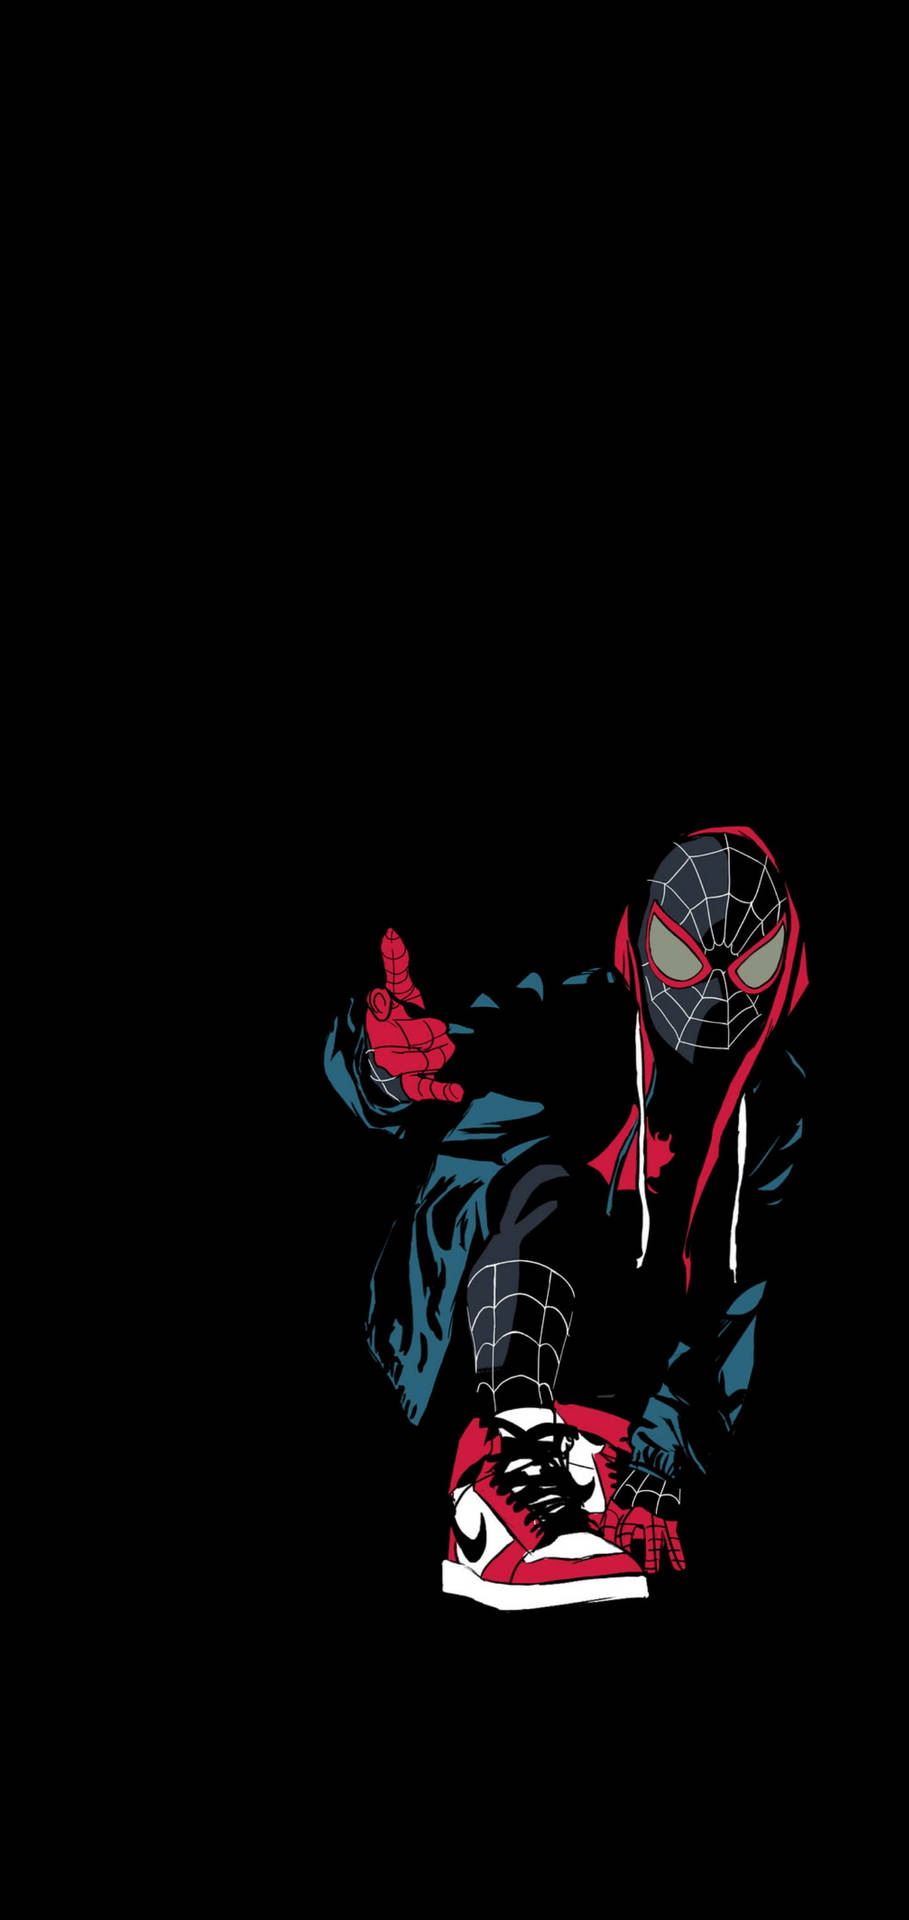 Cyborg Marvel's Spider-Man Miles Morales Wallpapers